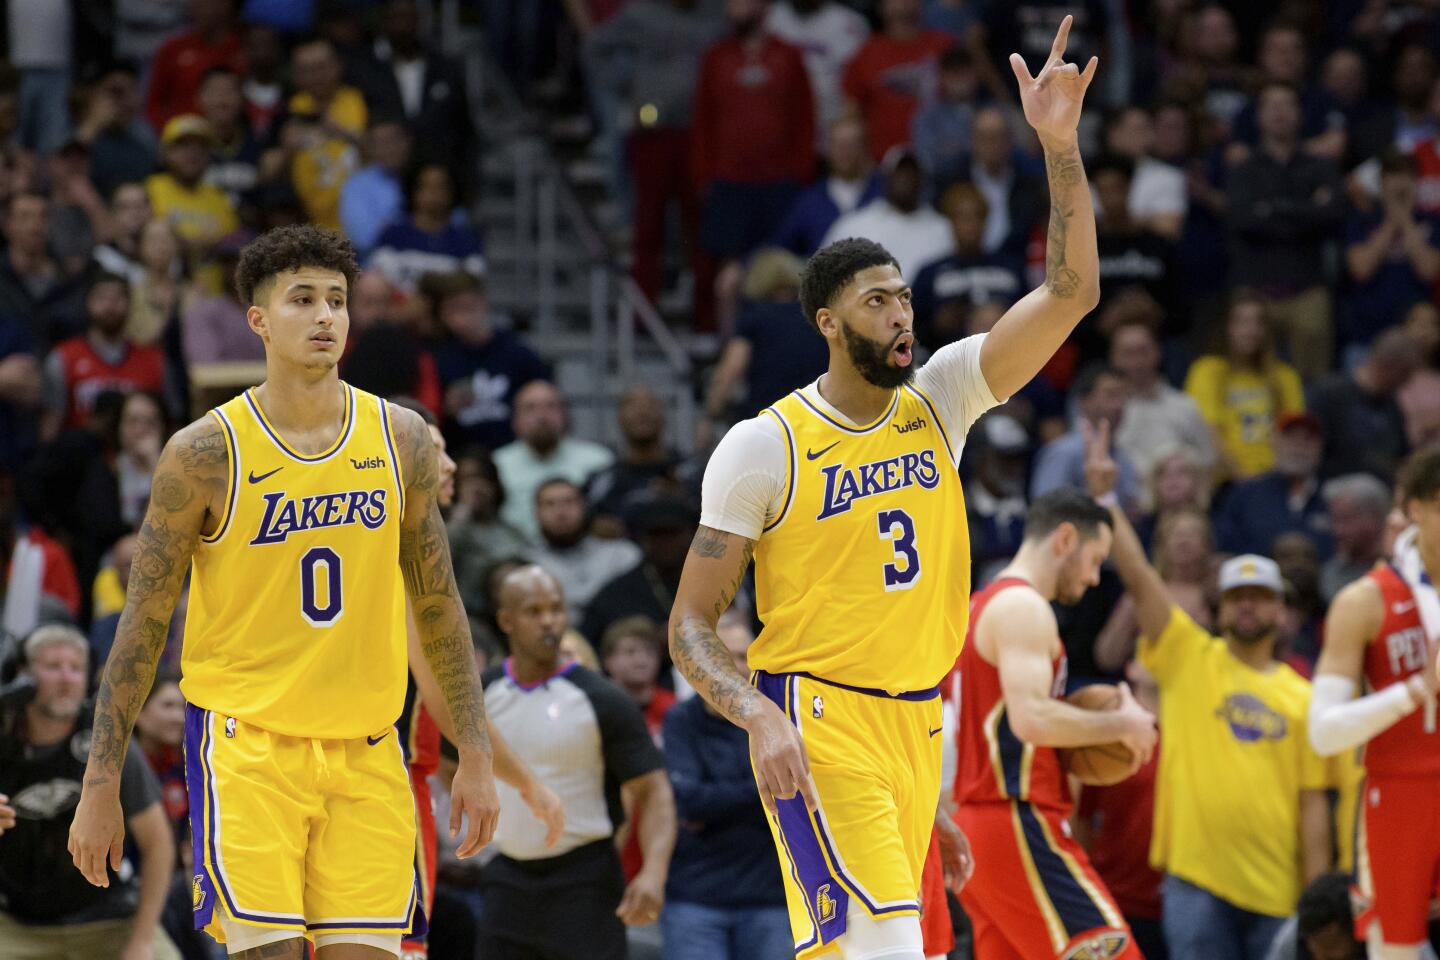 Anthony Davis celebrates after a foul shot to seal a victory in the closing seconds of the Lakers' 114-110 win over the Pelicans.